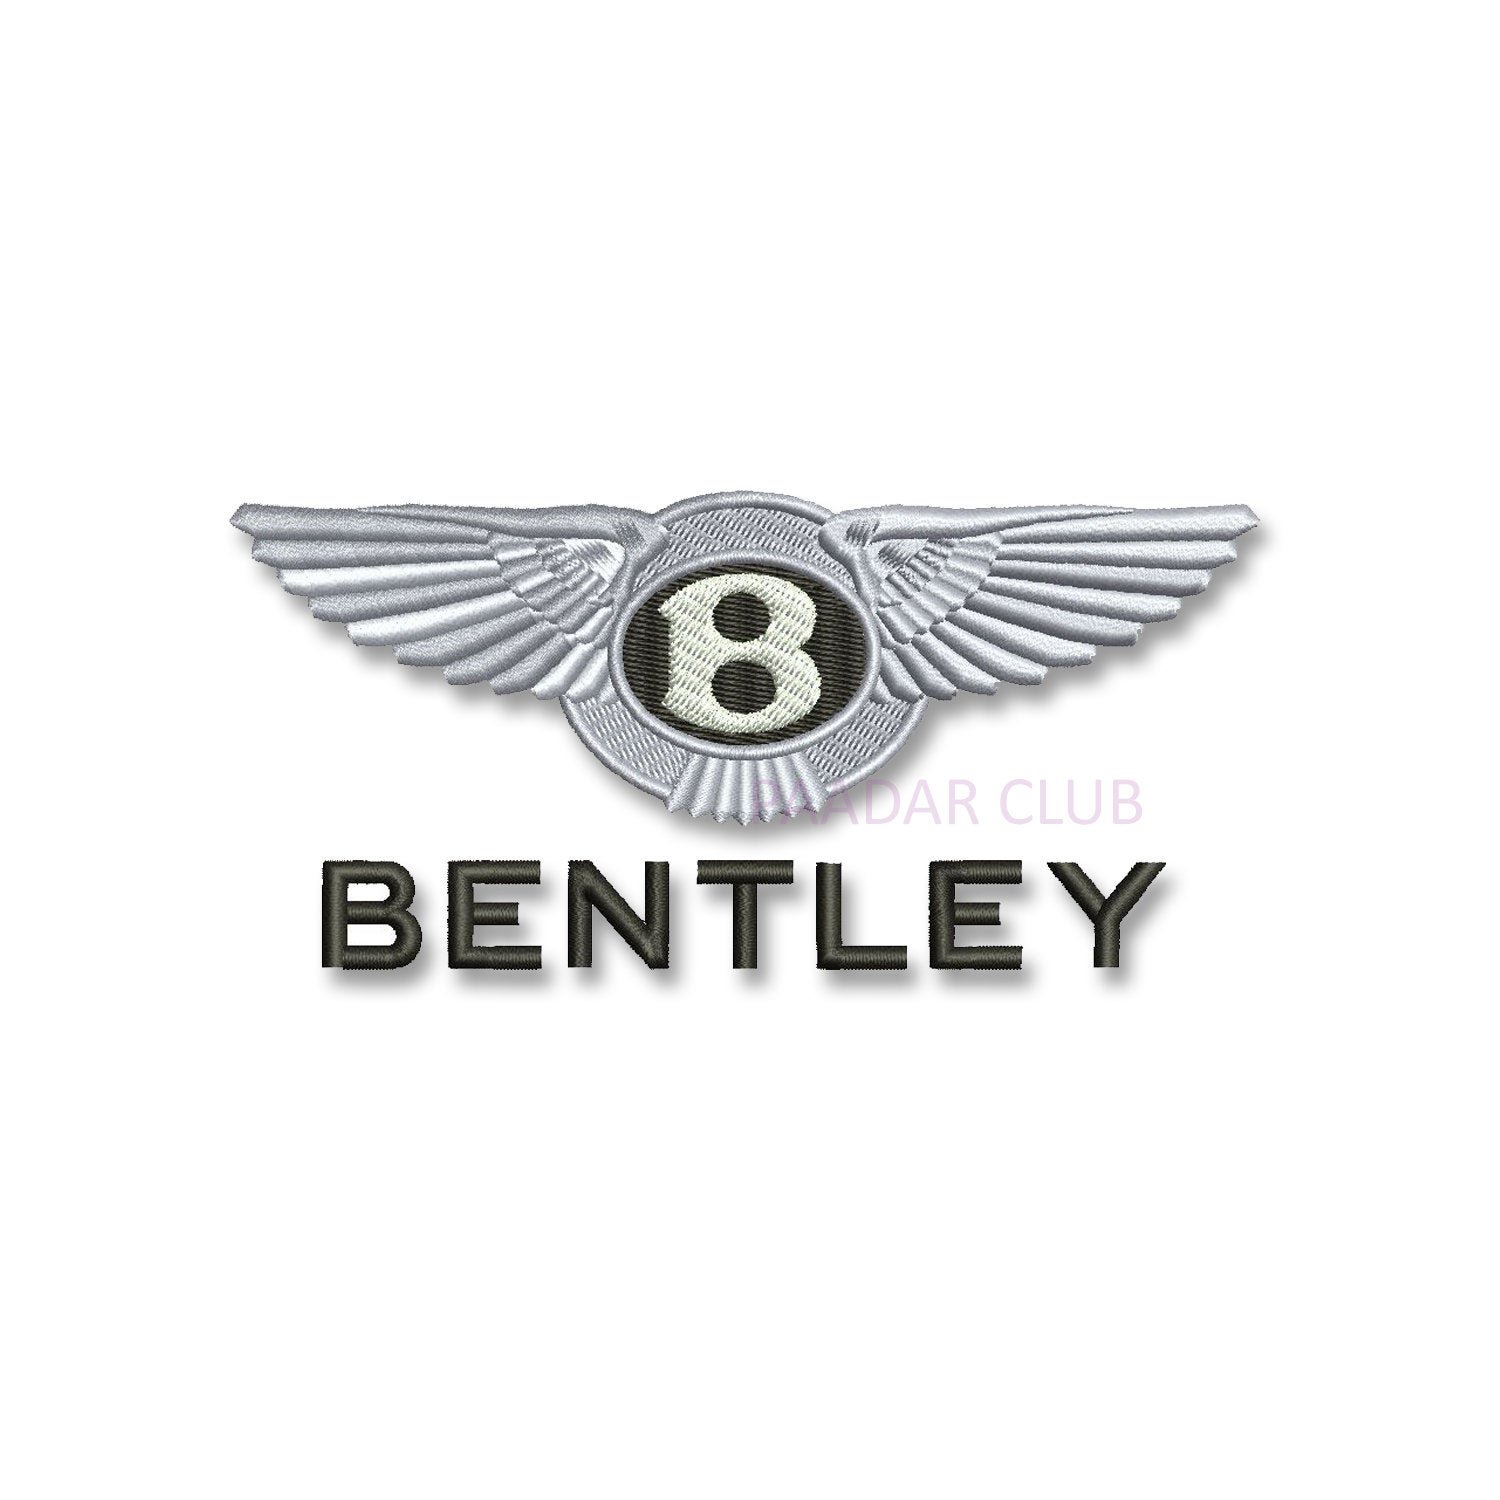 Bentley Motors Logo Iron on Sew on Embroidered Patch applique